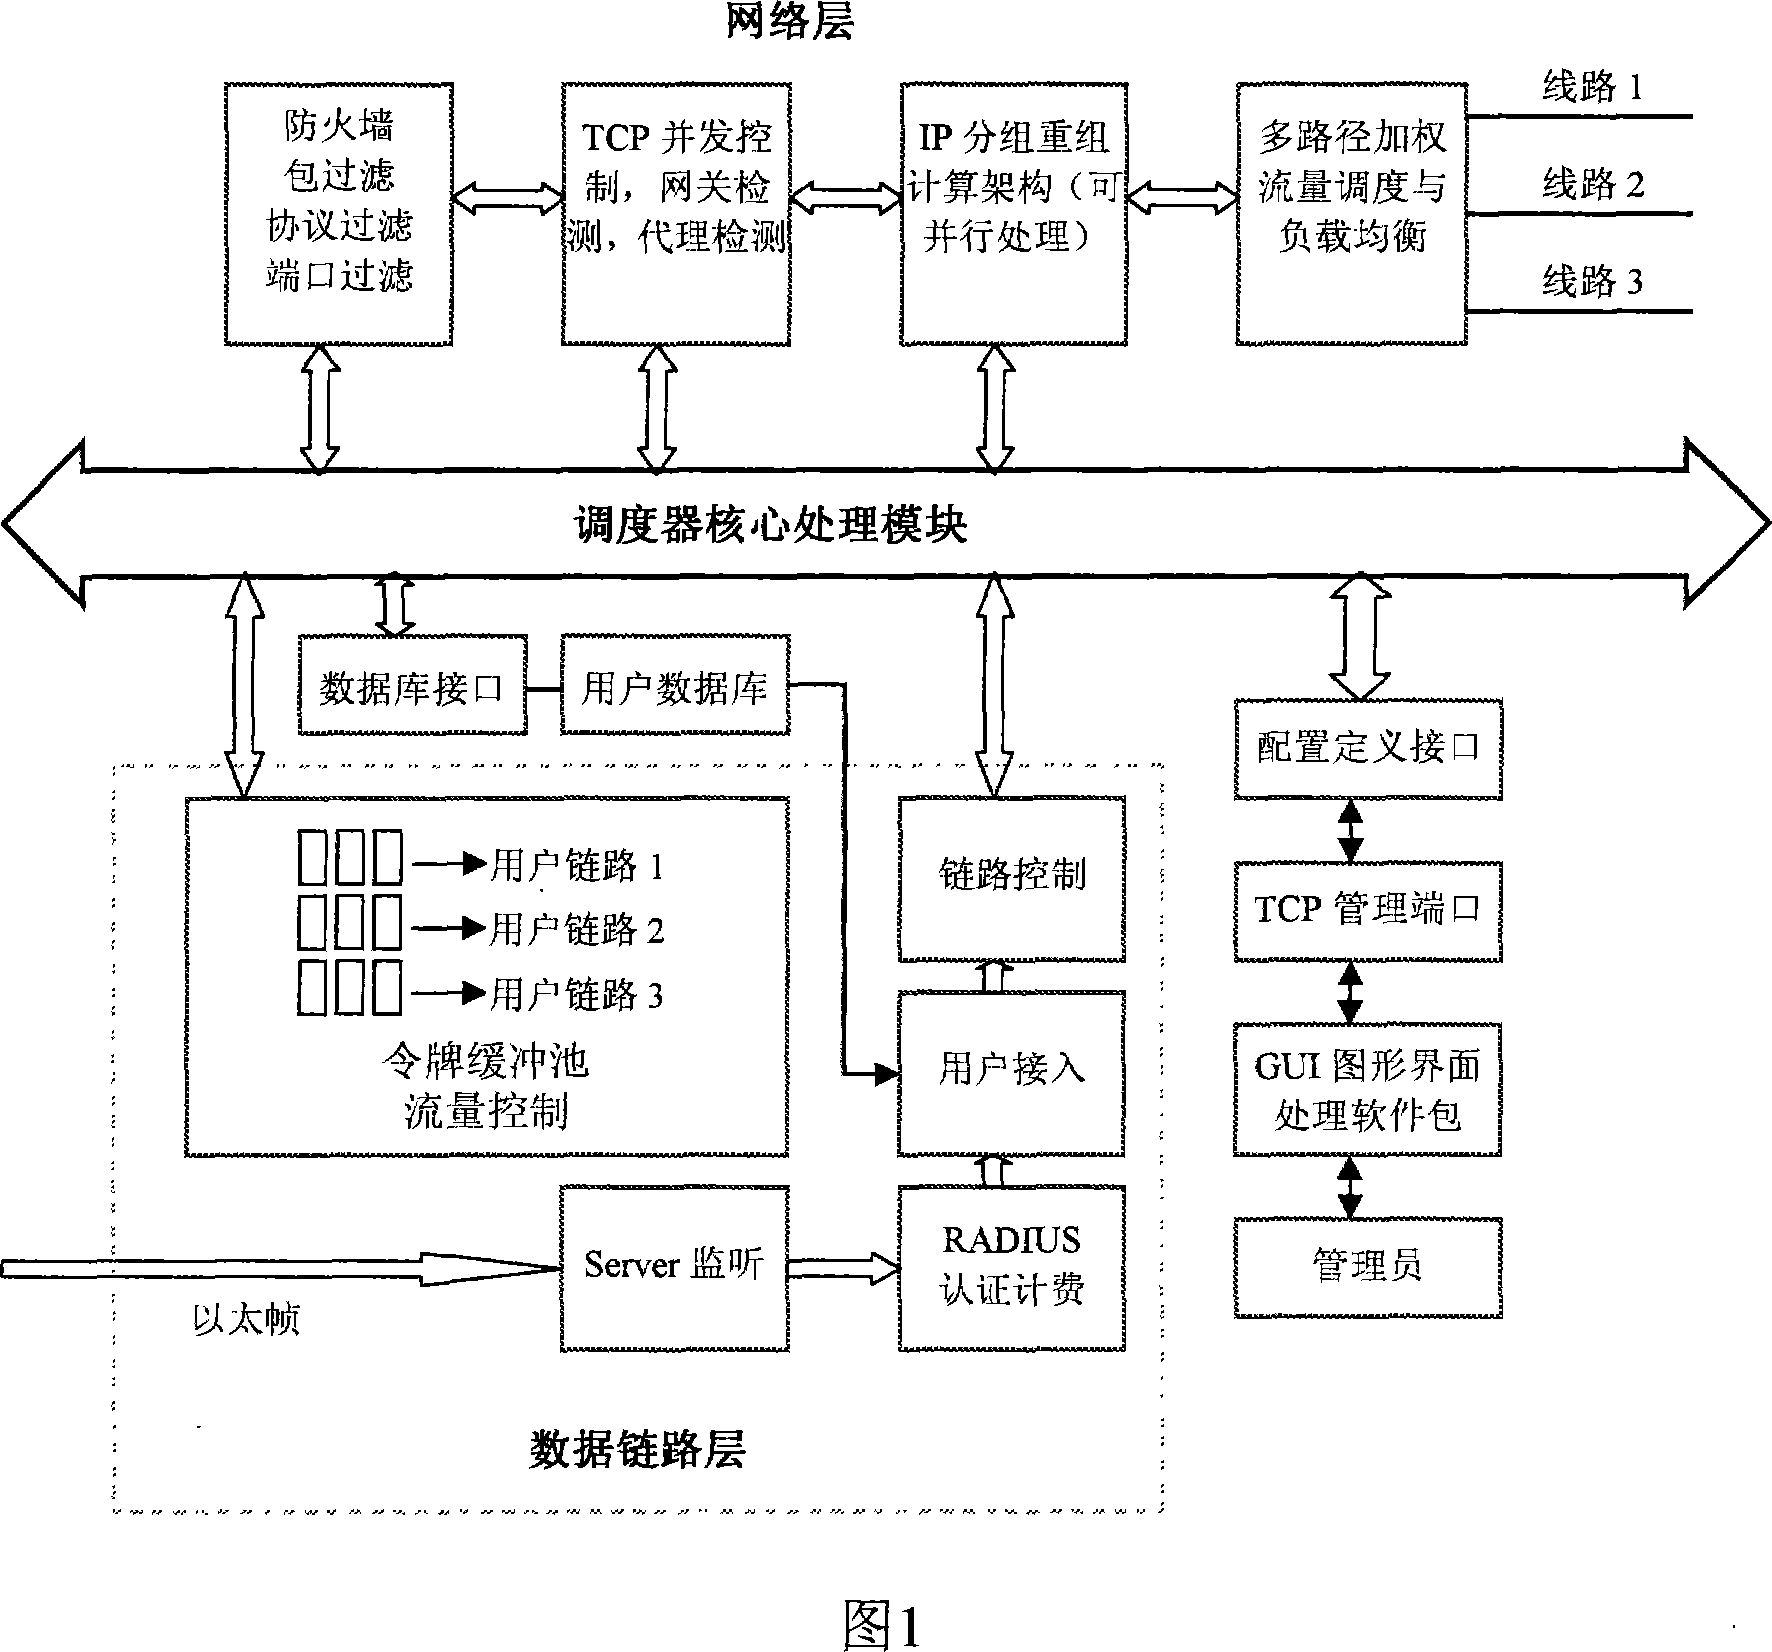 Wideband network access and flow management scheduling system